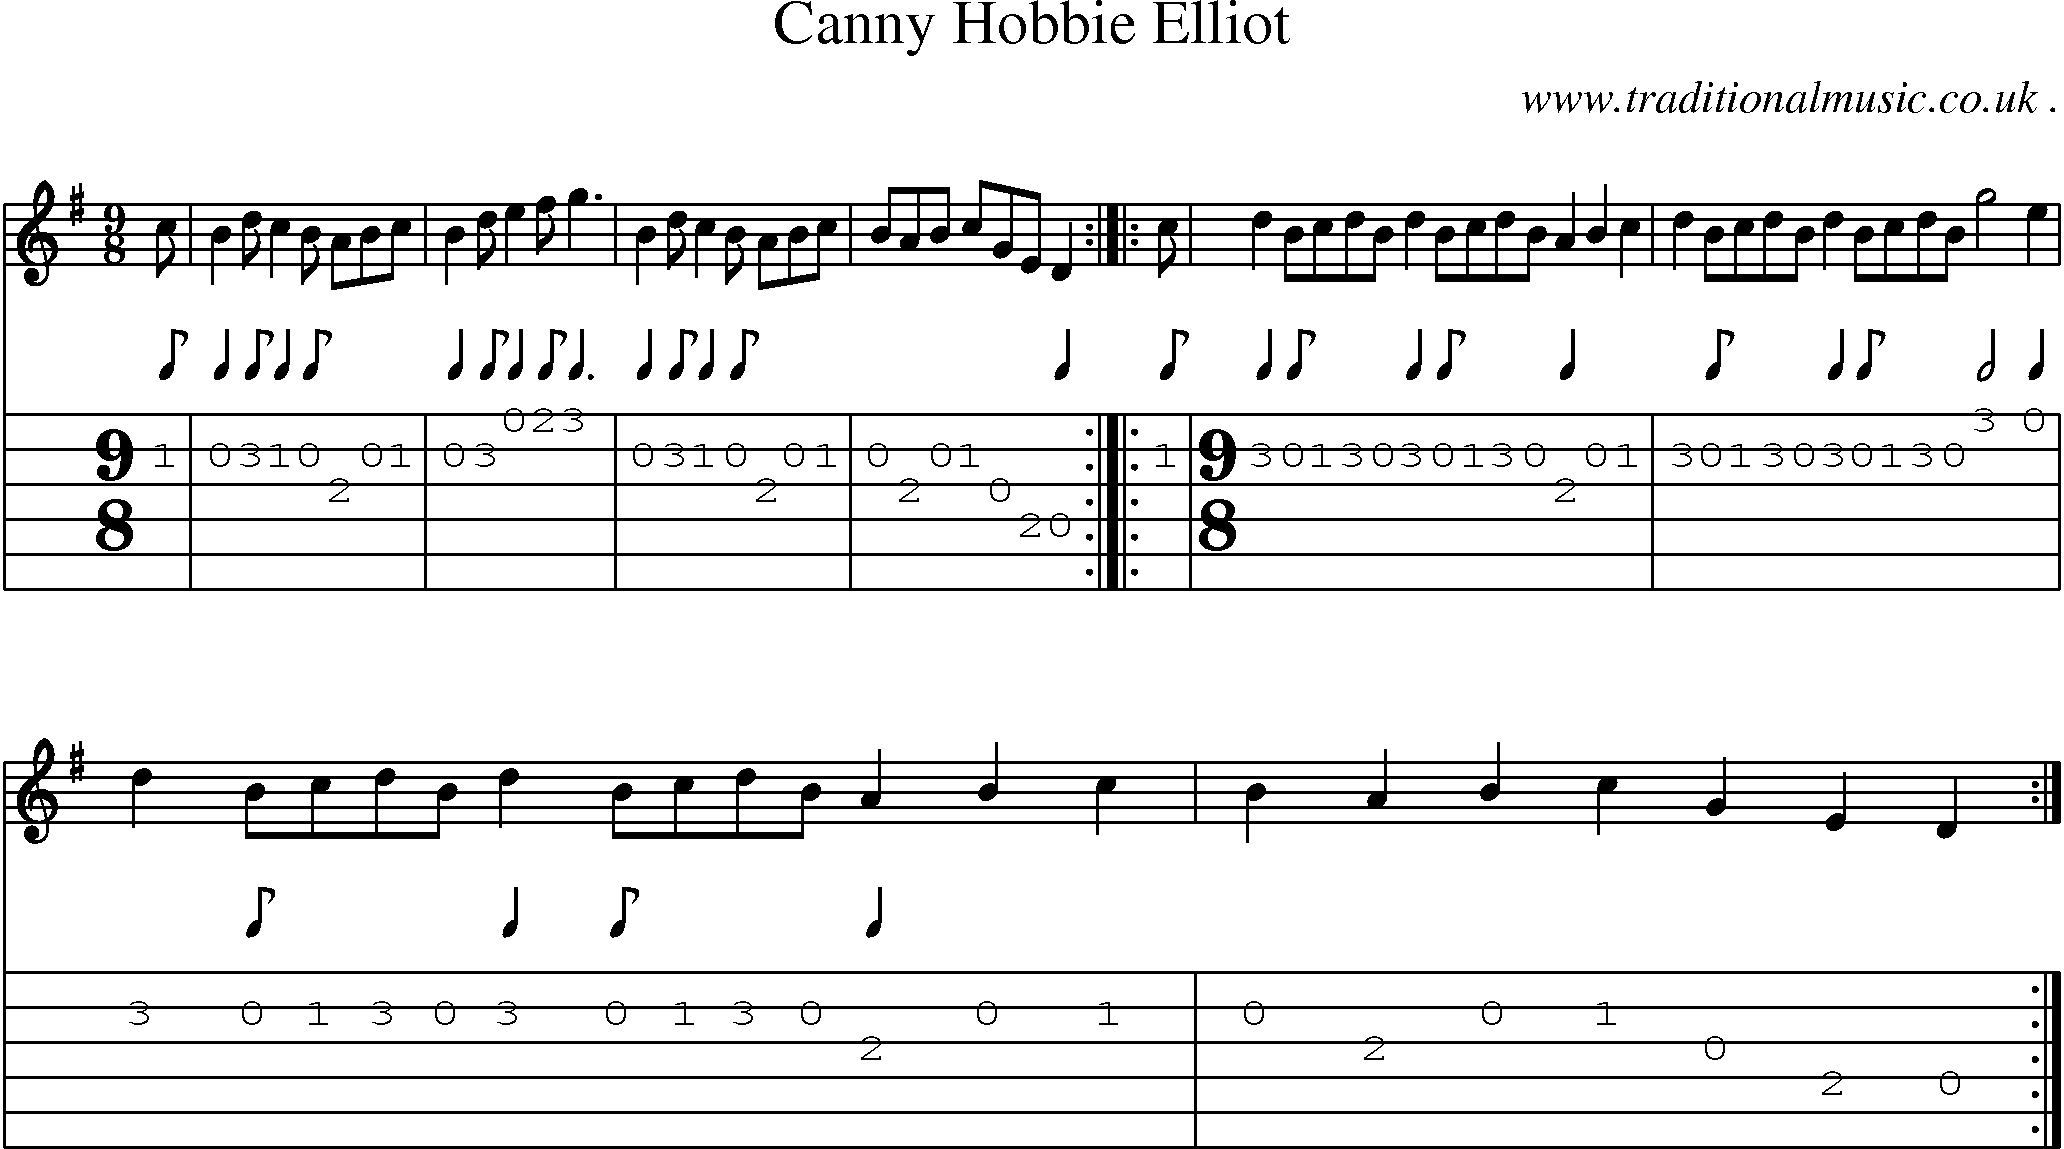 Sheet-Music and Guitar Tabs for Canny Hobbie Elliot